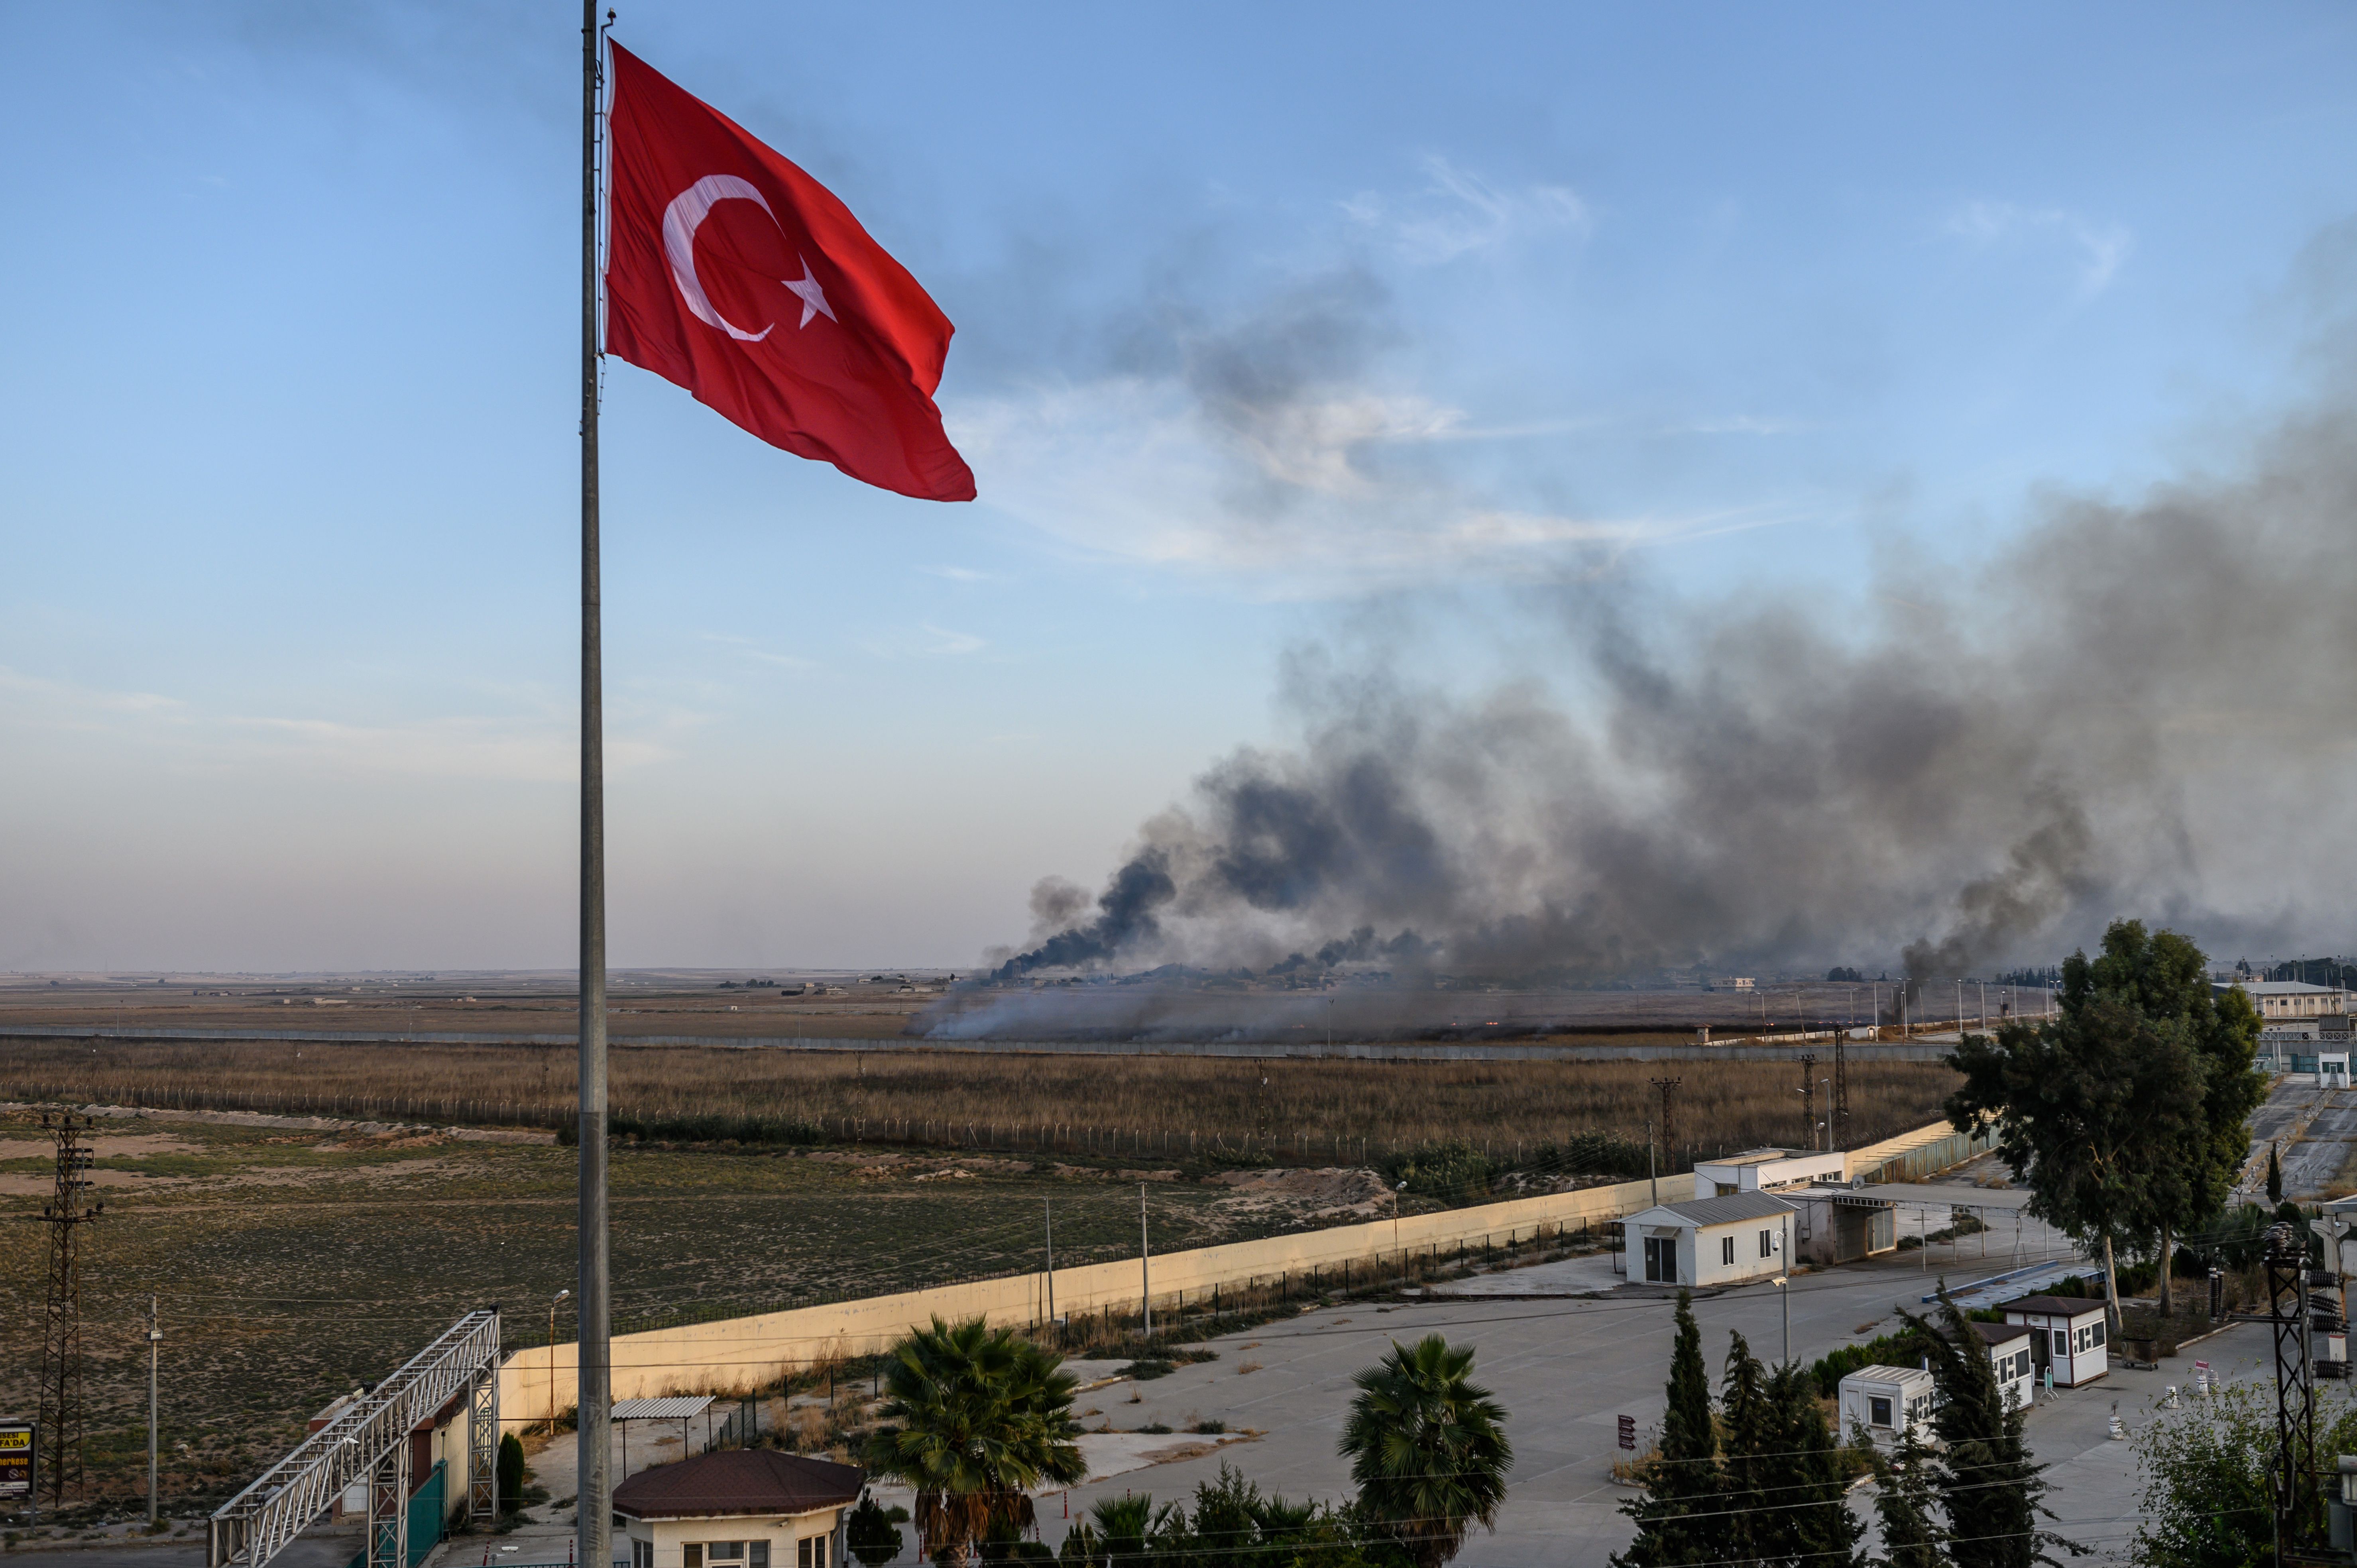 A Turkish flag flies in the foreground while smoke rises from over the border in Syria.